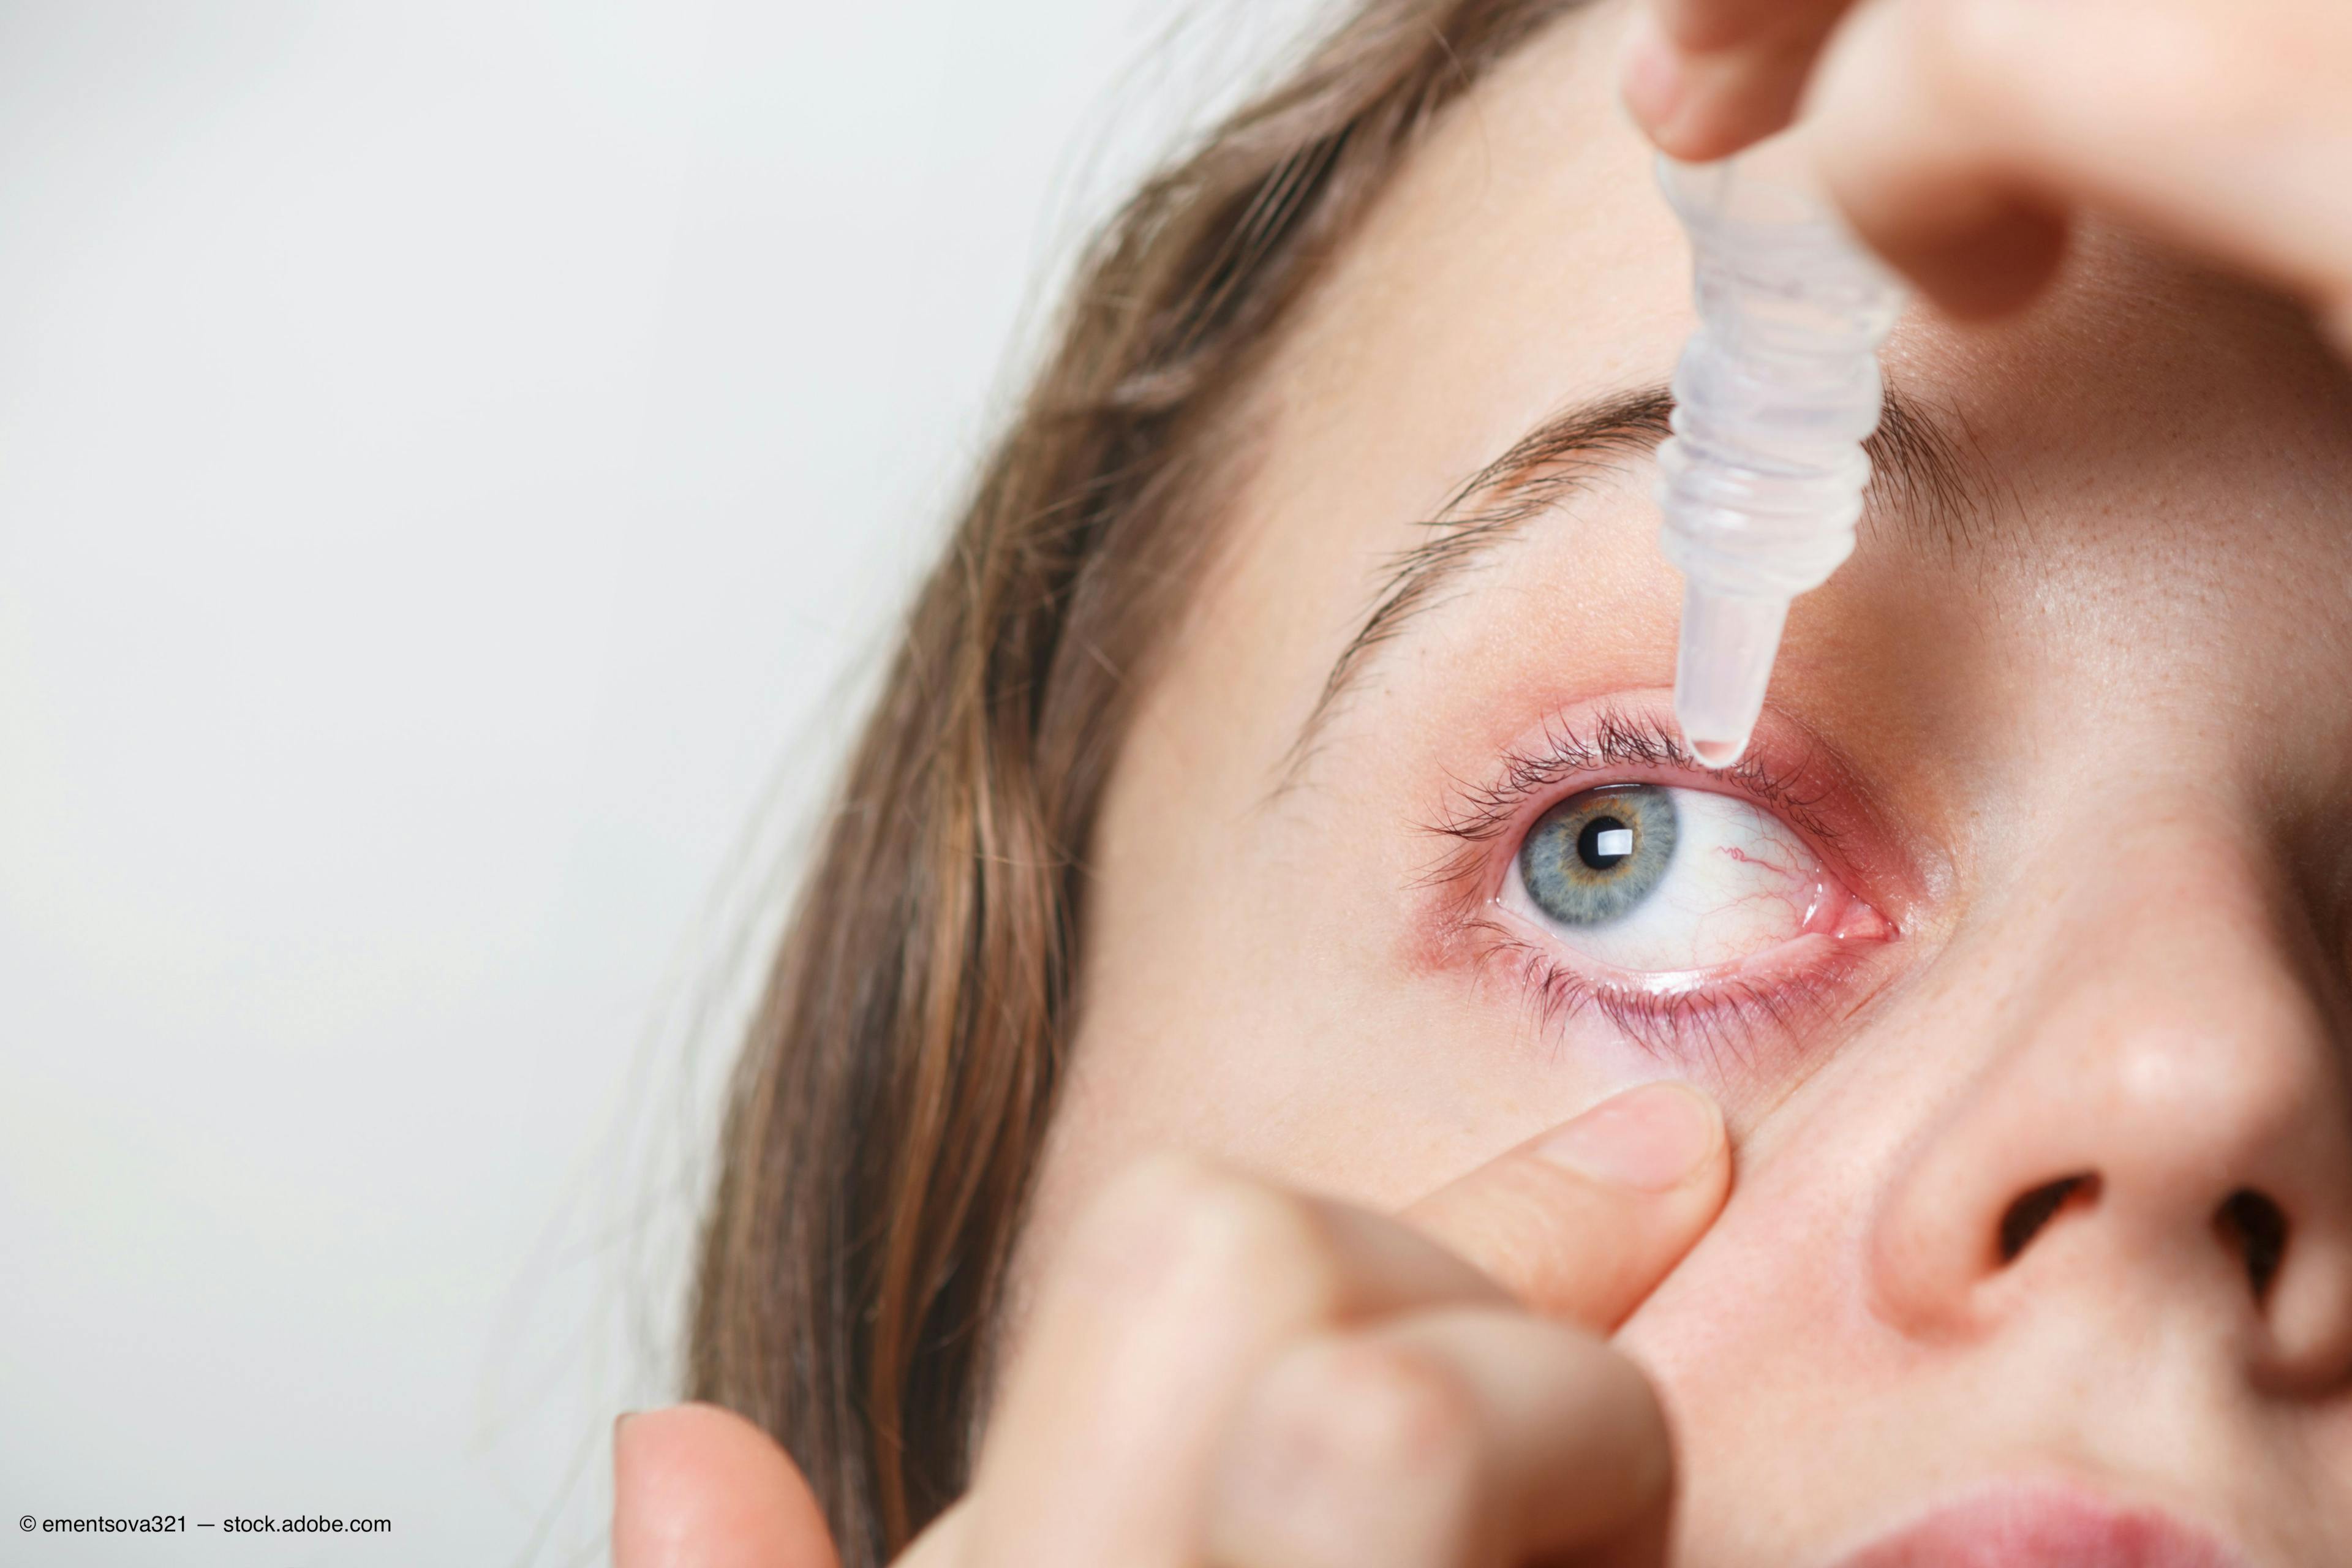 Myths and misconceptions about autologous serum for dry eye